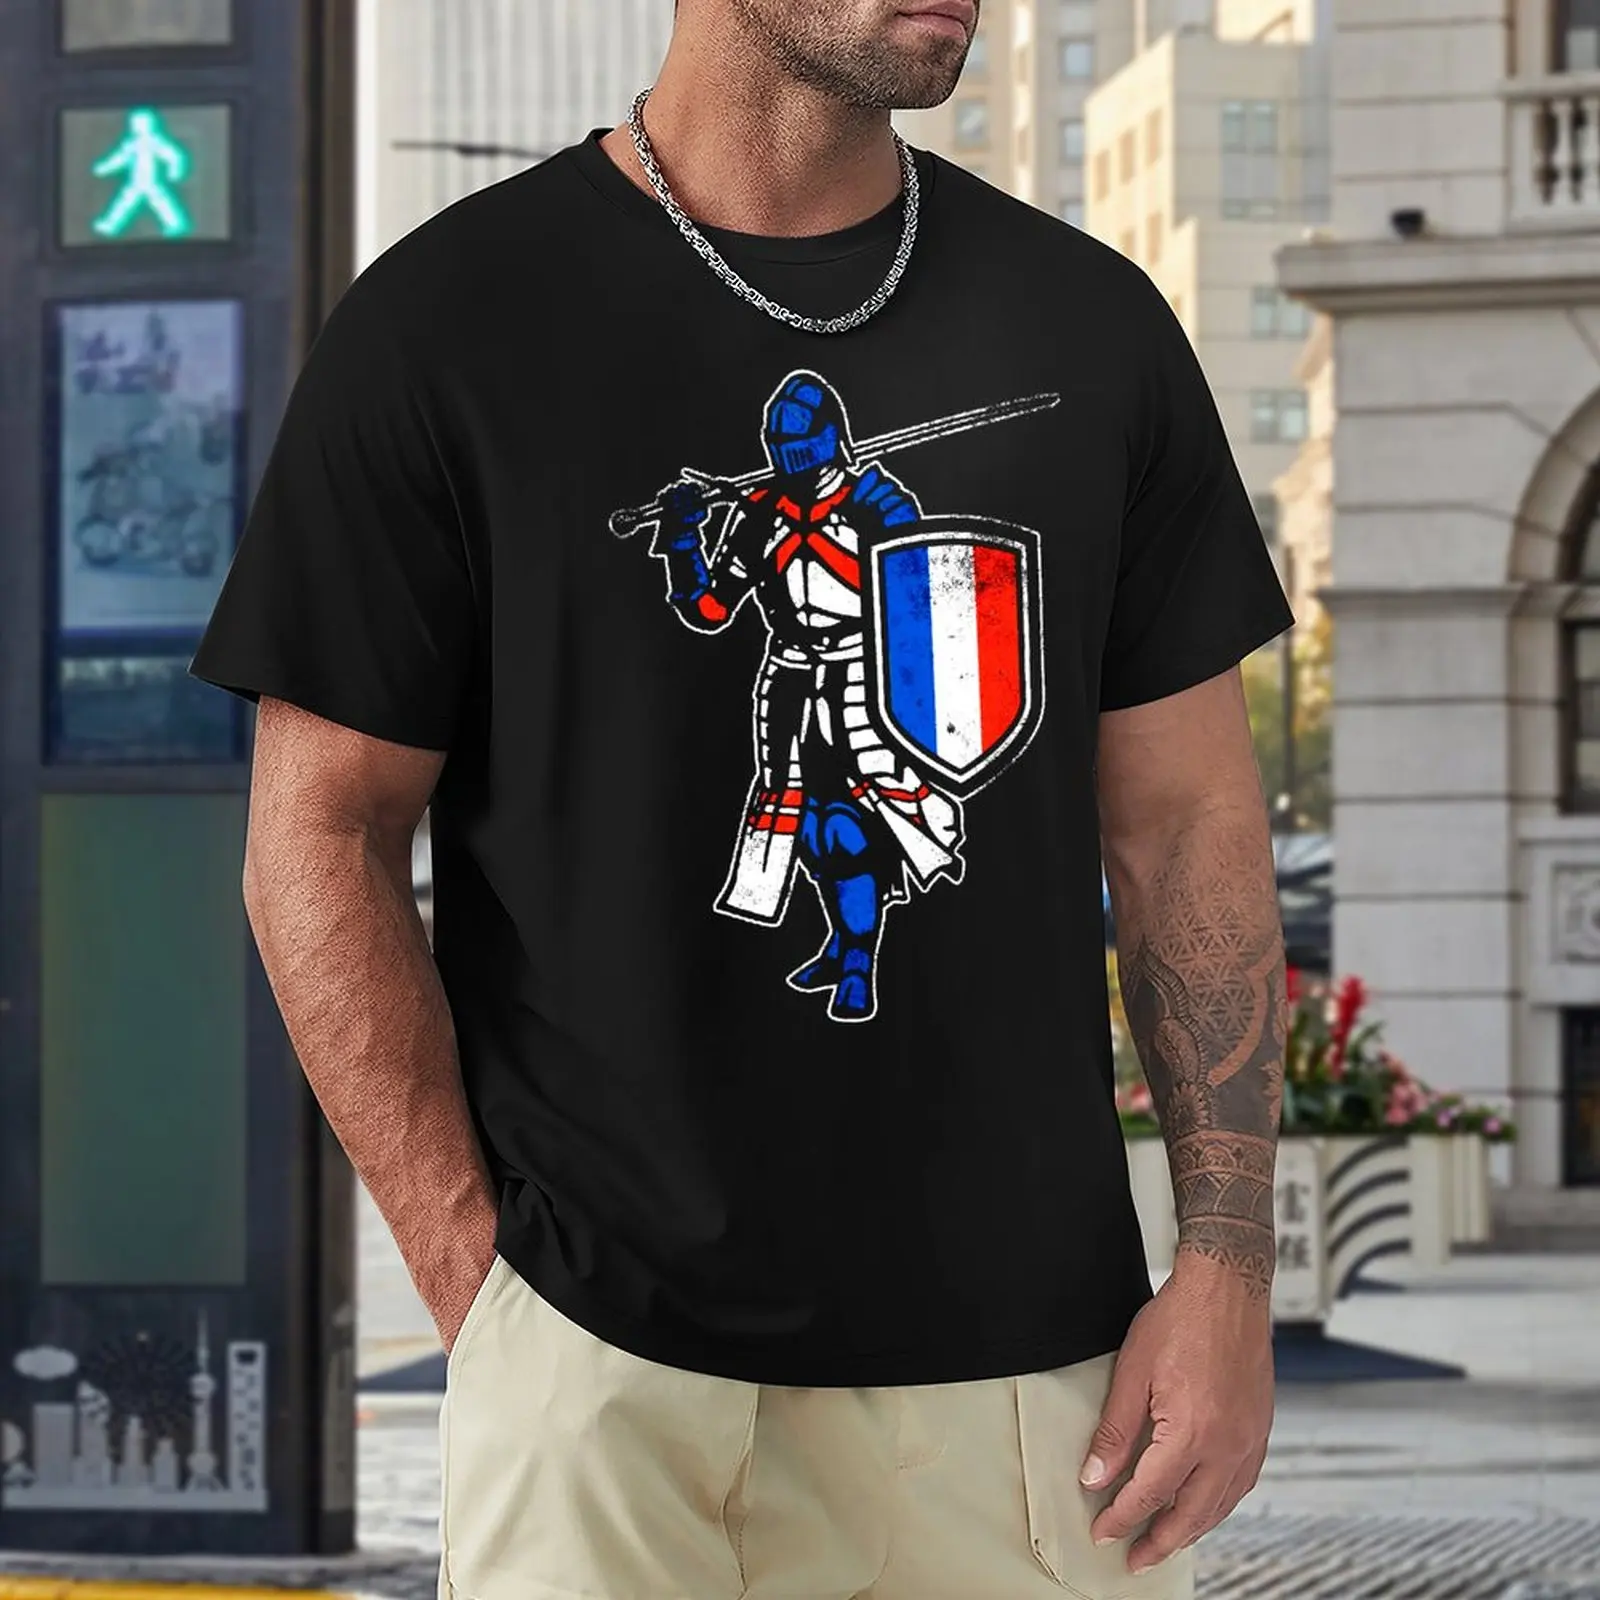 

French Knight Essential T-shirt Crewneck Campaign Top Tee Graphic Home Humor Graphic USA Size